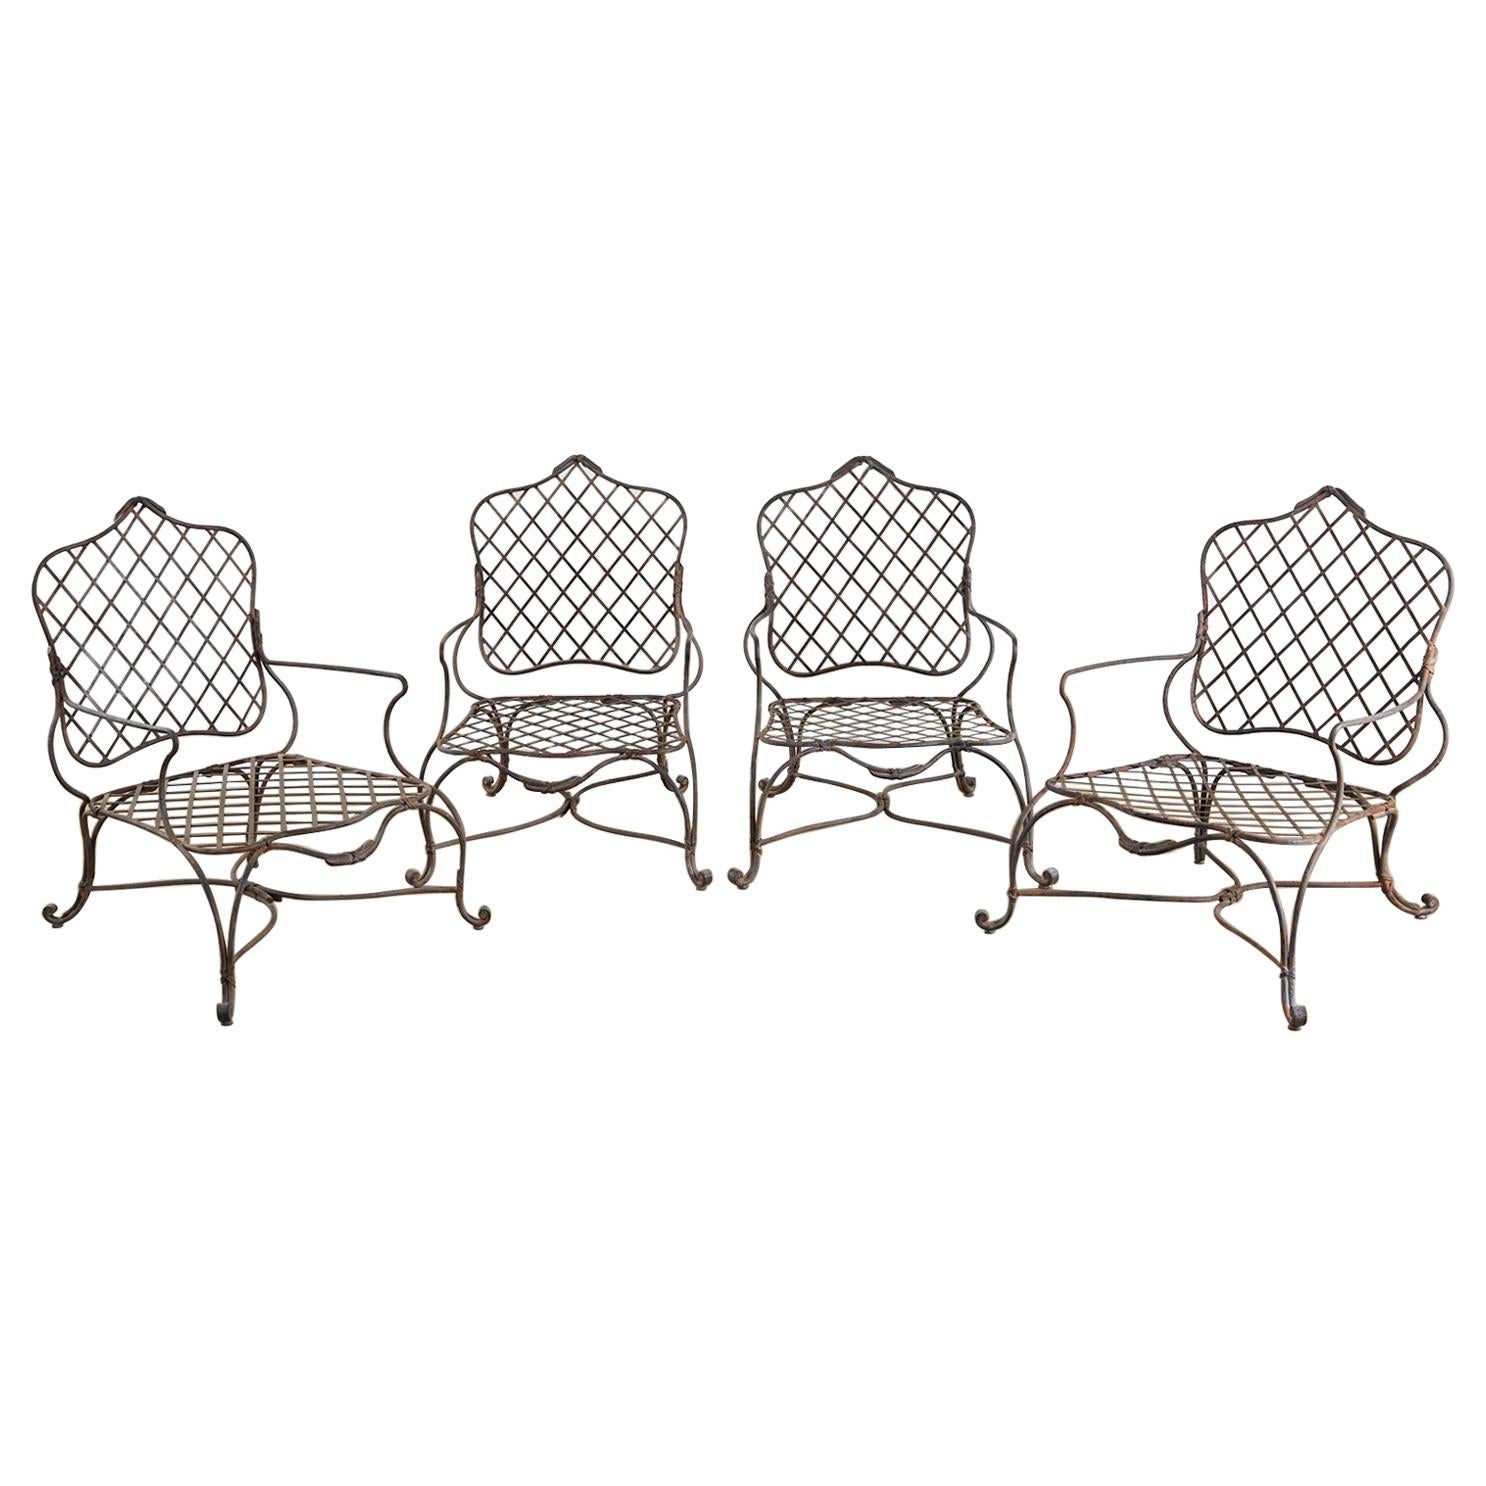 Set of Four Rose Tarlow Twig Iron Garden Lounge Chairs